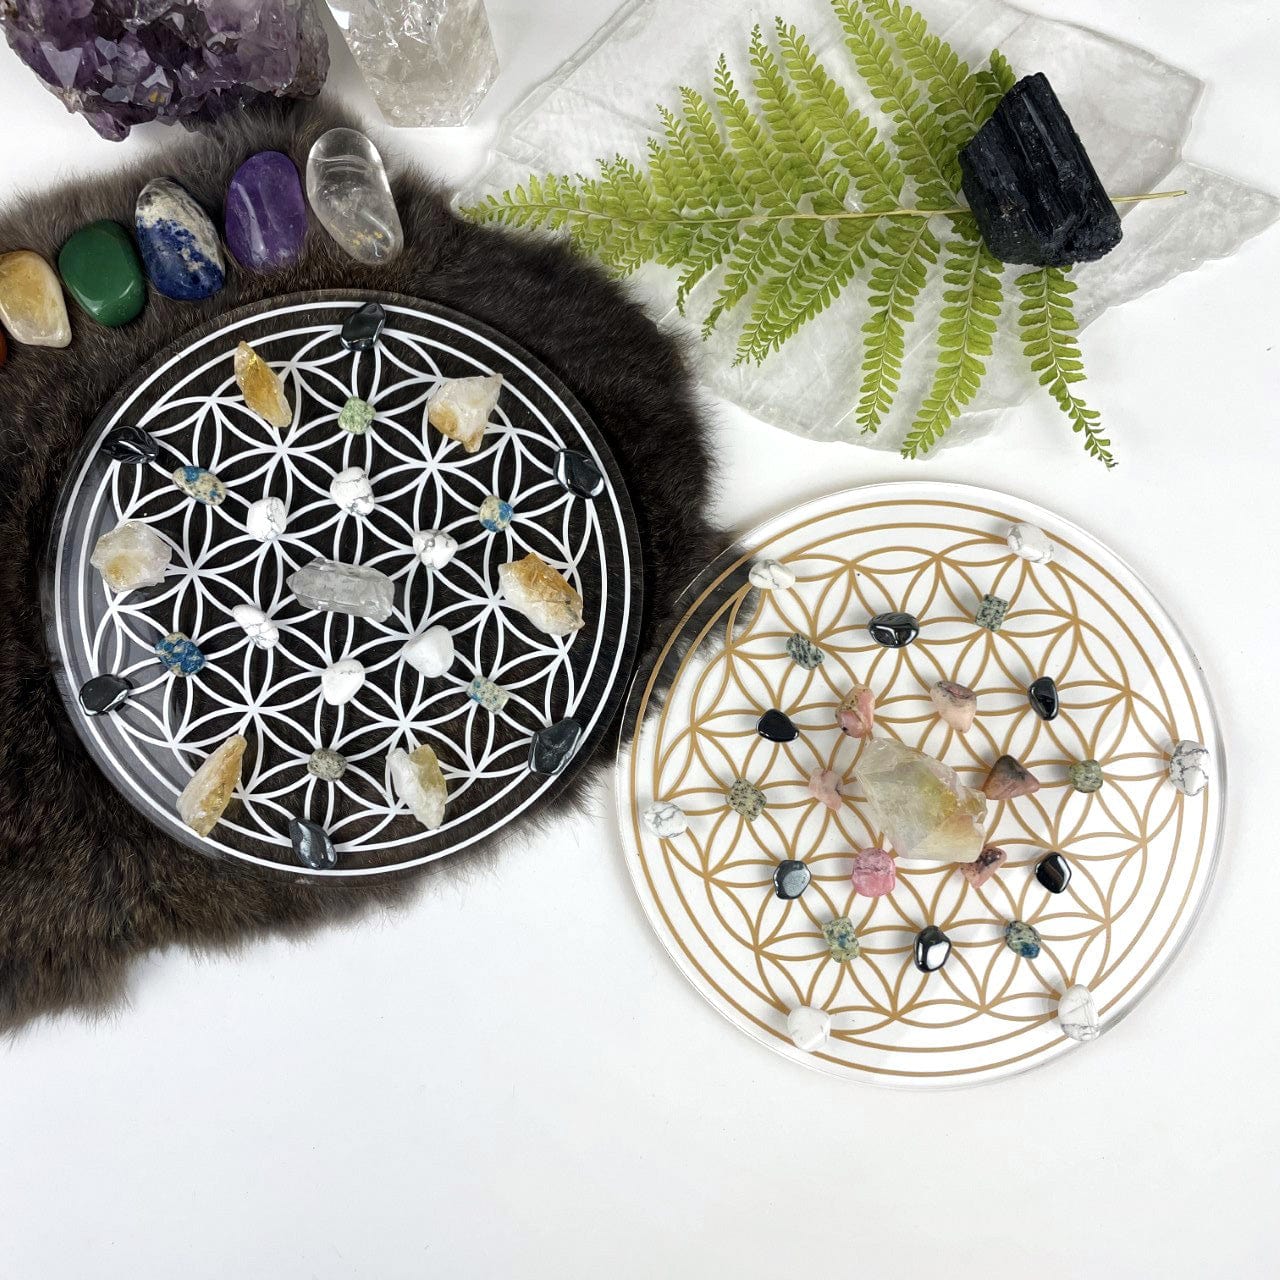 Crystal Grid Flower of Life Acrylic Grid - 2 sided - showing 1 White and 1 Gold with crystals on it